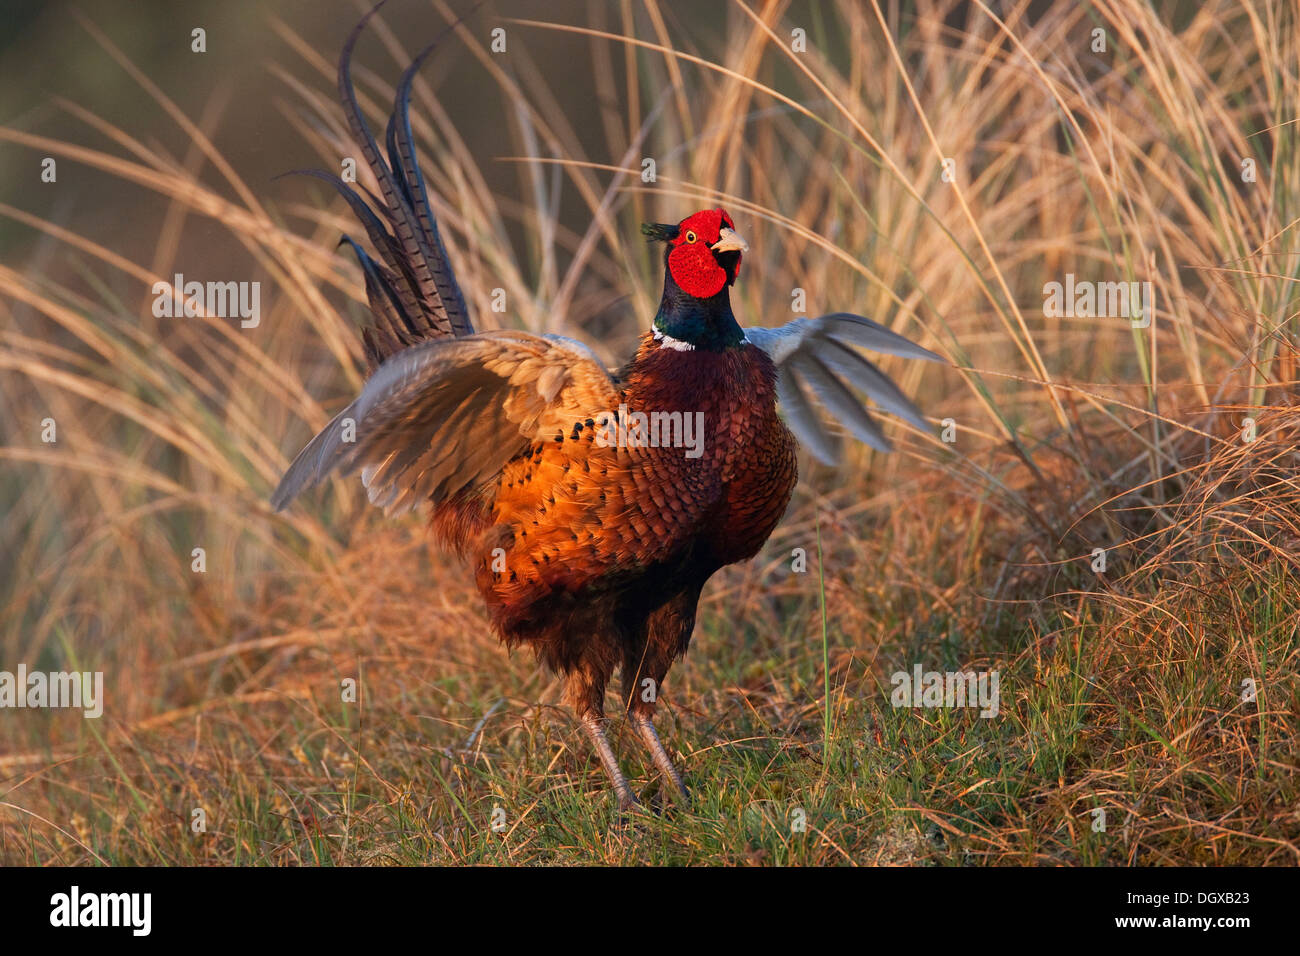 Pheasant (Phasianus colchicus), fluttering jump, Texel, The Netherlands, Europe Stock Photo